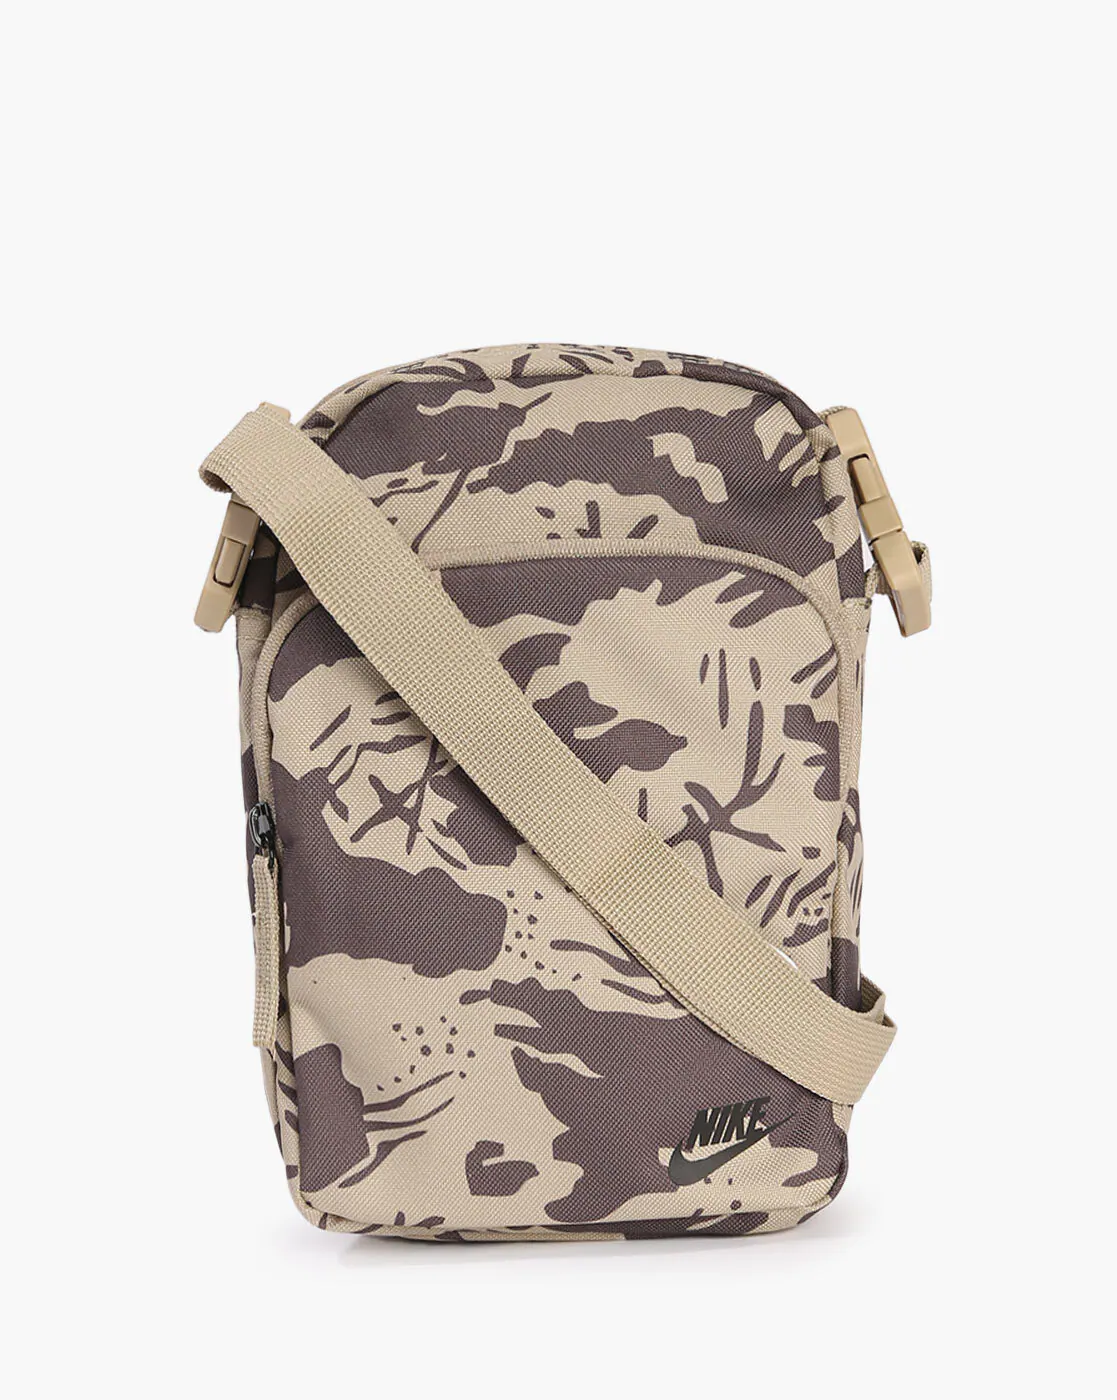 Camouflage Print Crossbody Bag with Detachable Strap -Dq5934-250